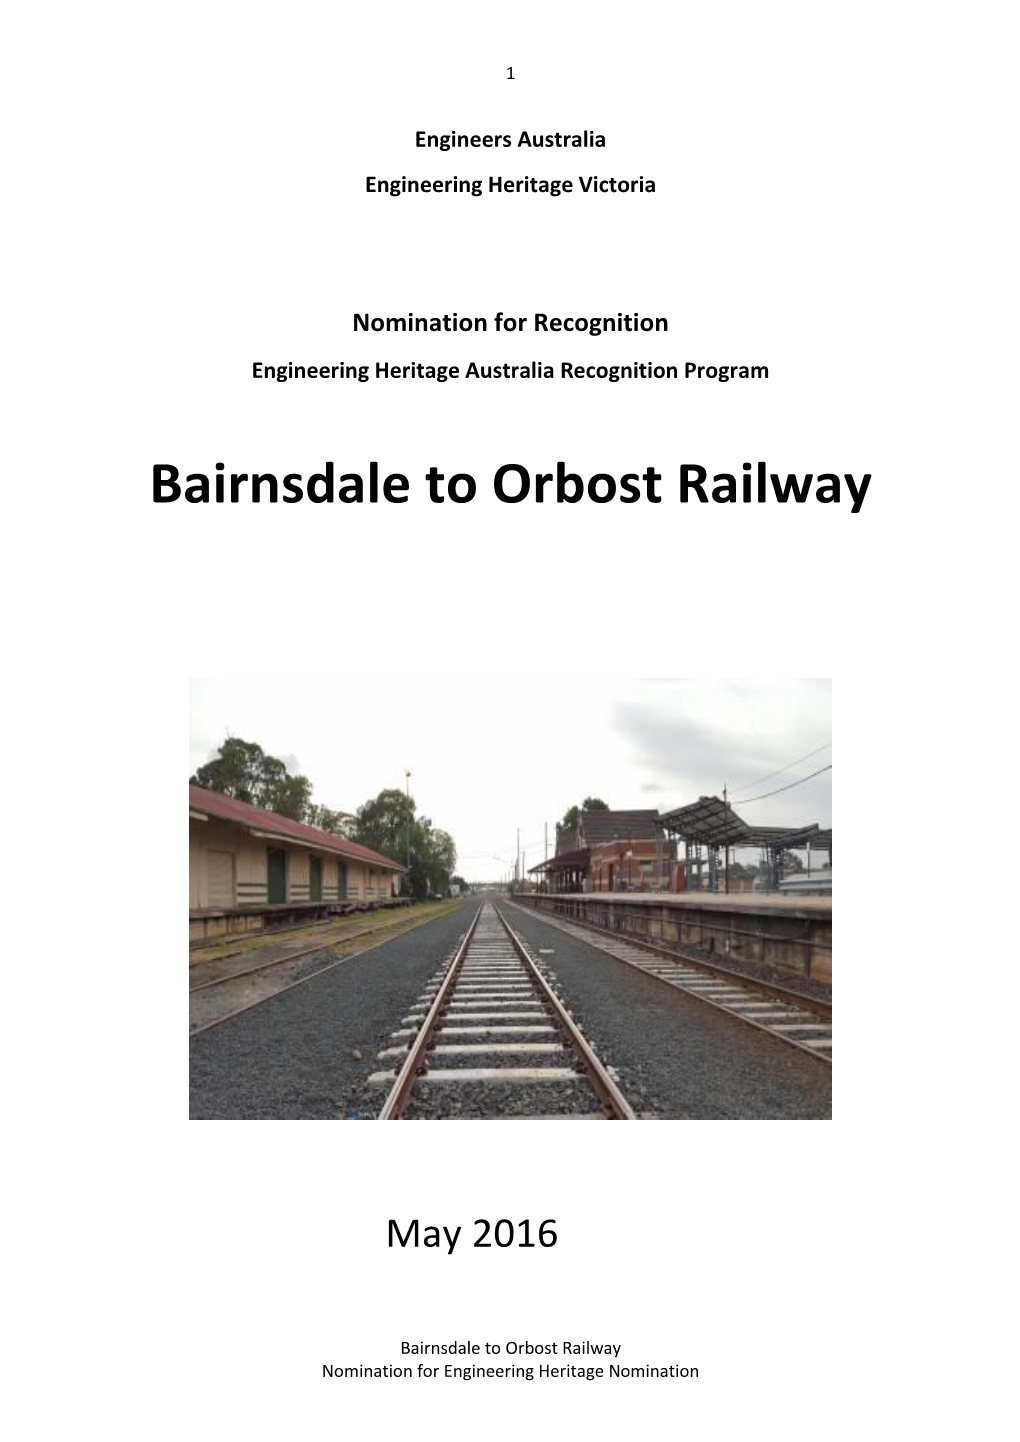 Bairnsdale to Orbost Railway Nomination for Engineering Heritage Nomination 2